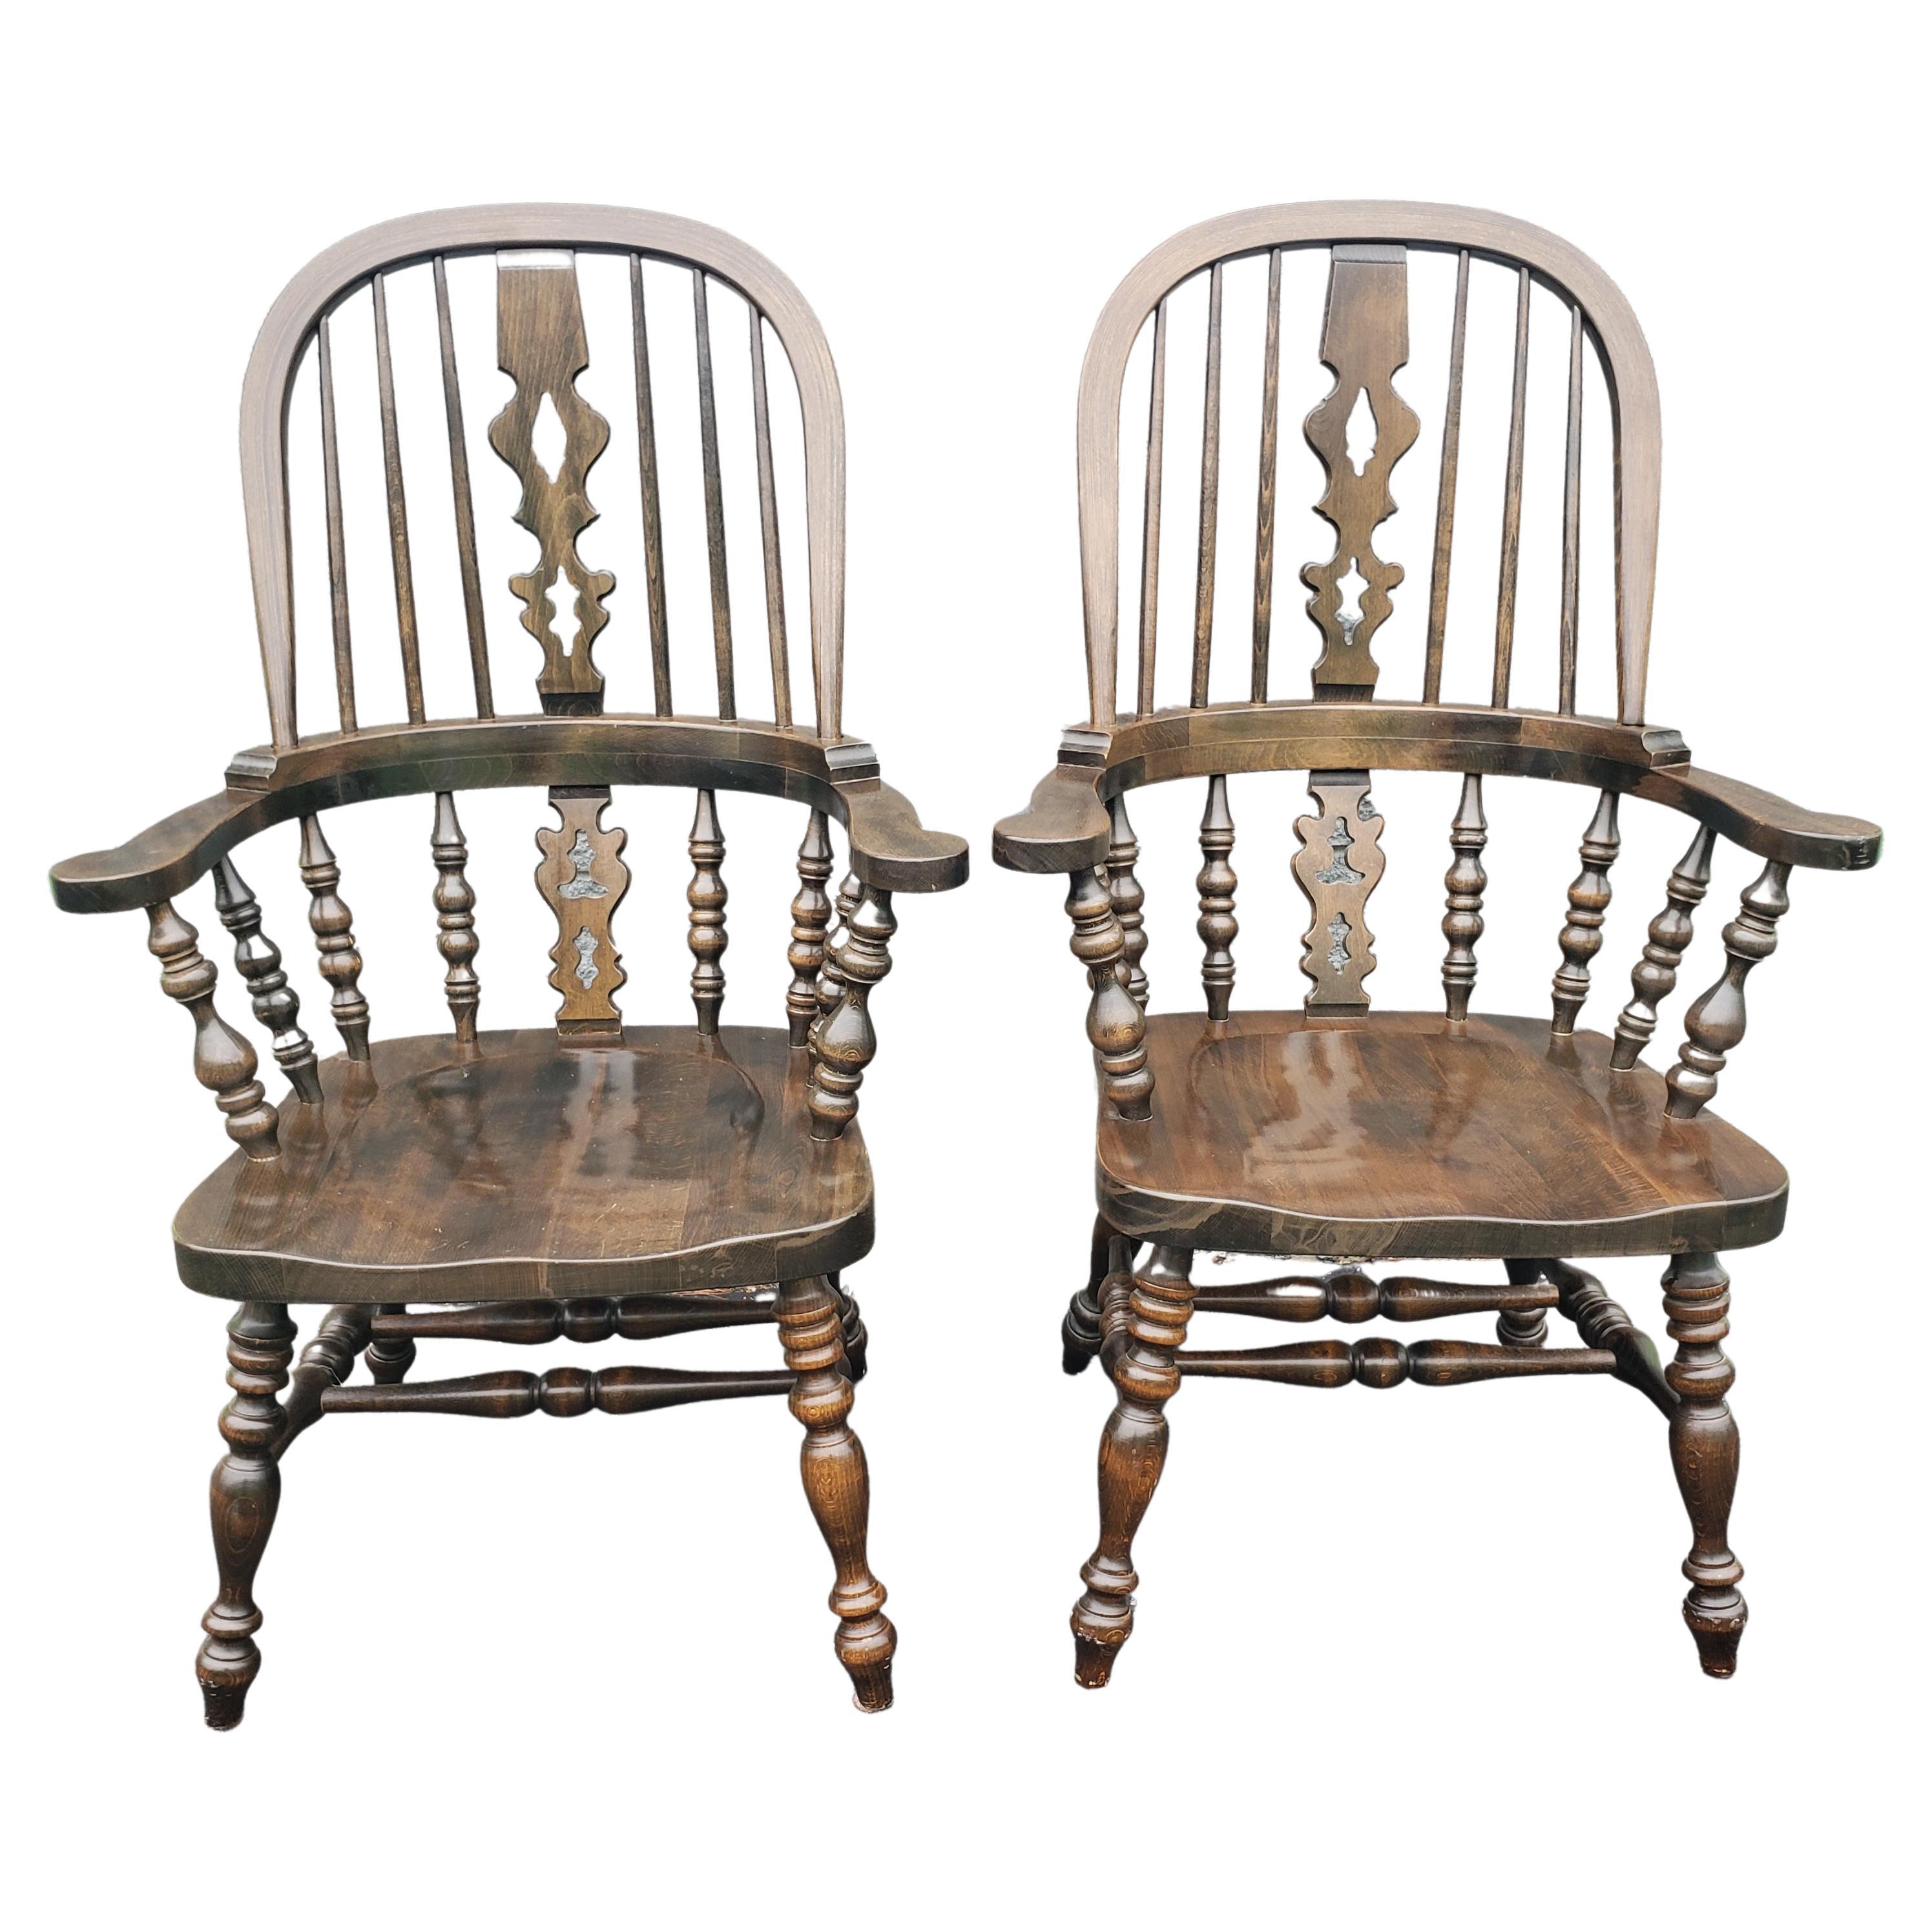 Antique European walnut high back Windsor armchairs.
European Windsor chairs Solid, sturdy and very comfortable.
Measures: 27